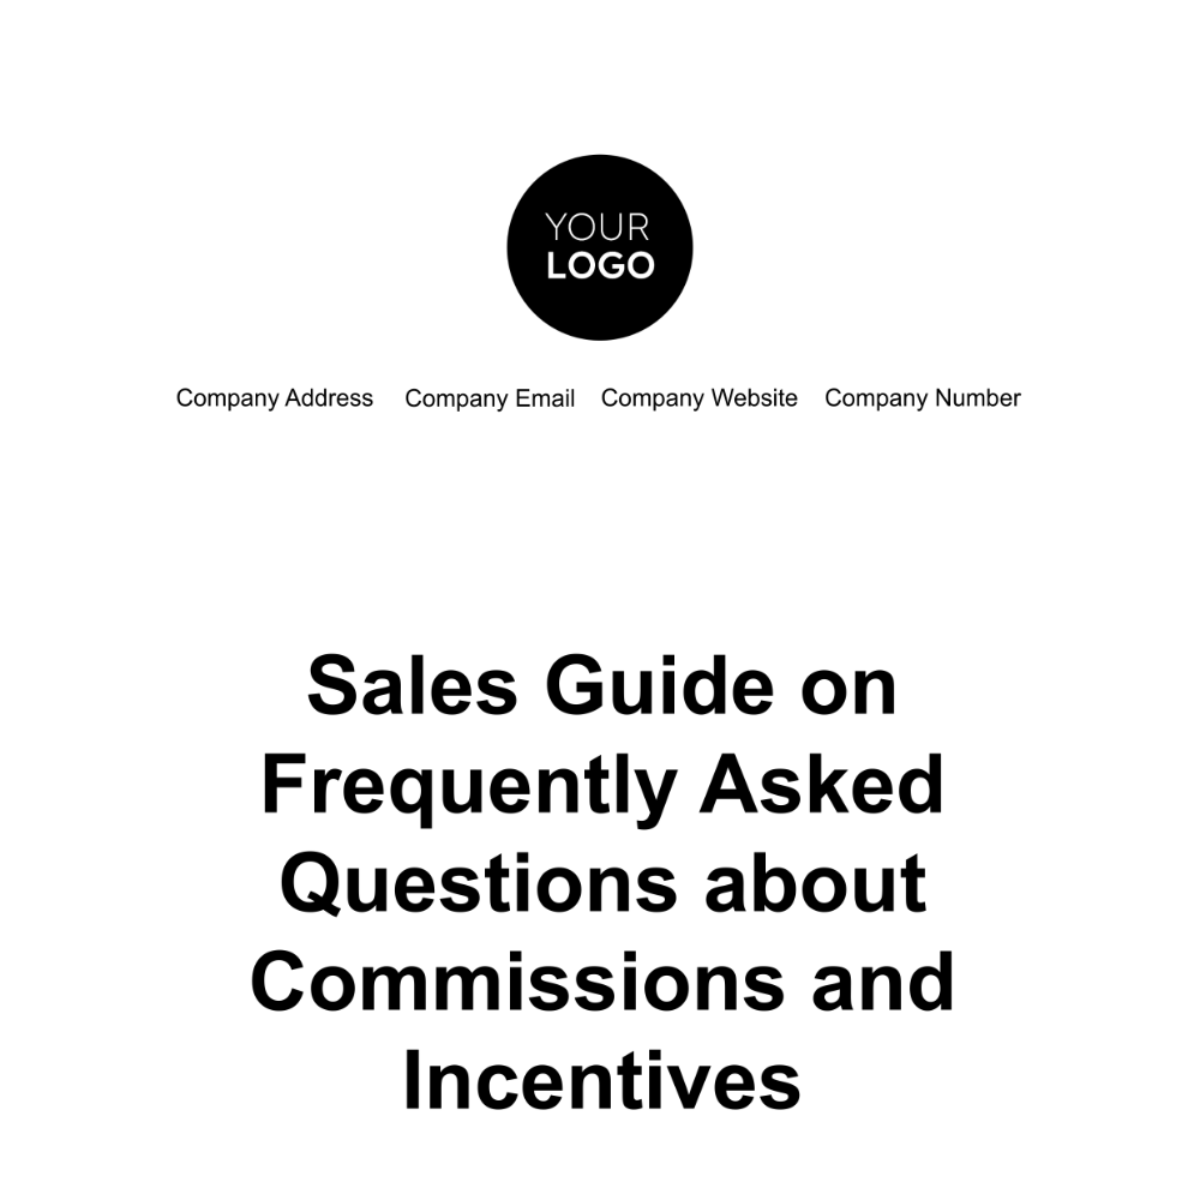 Sales Guide on Frequently Asked Questions about Commissions and Incentives Template